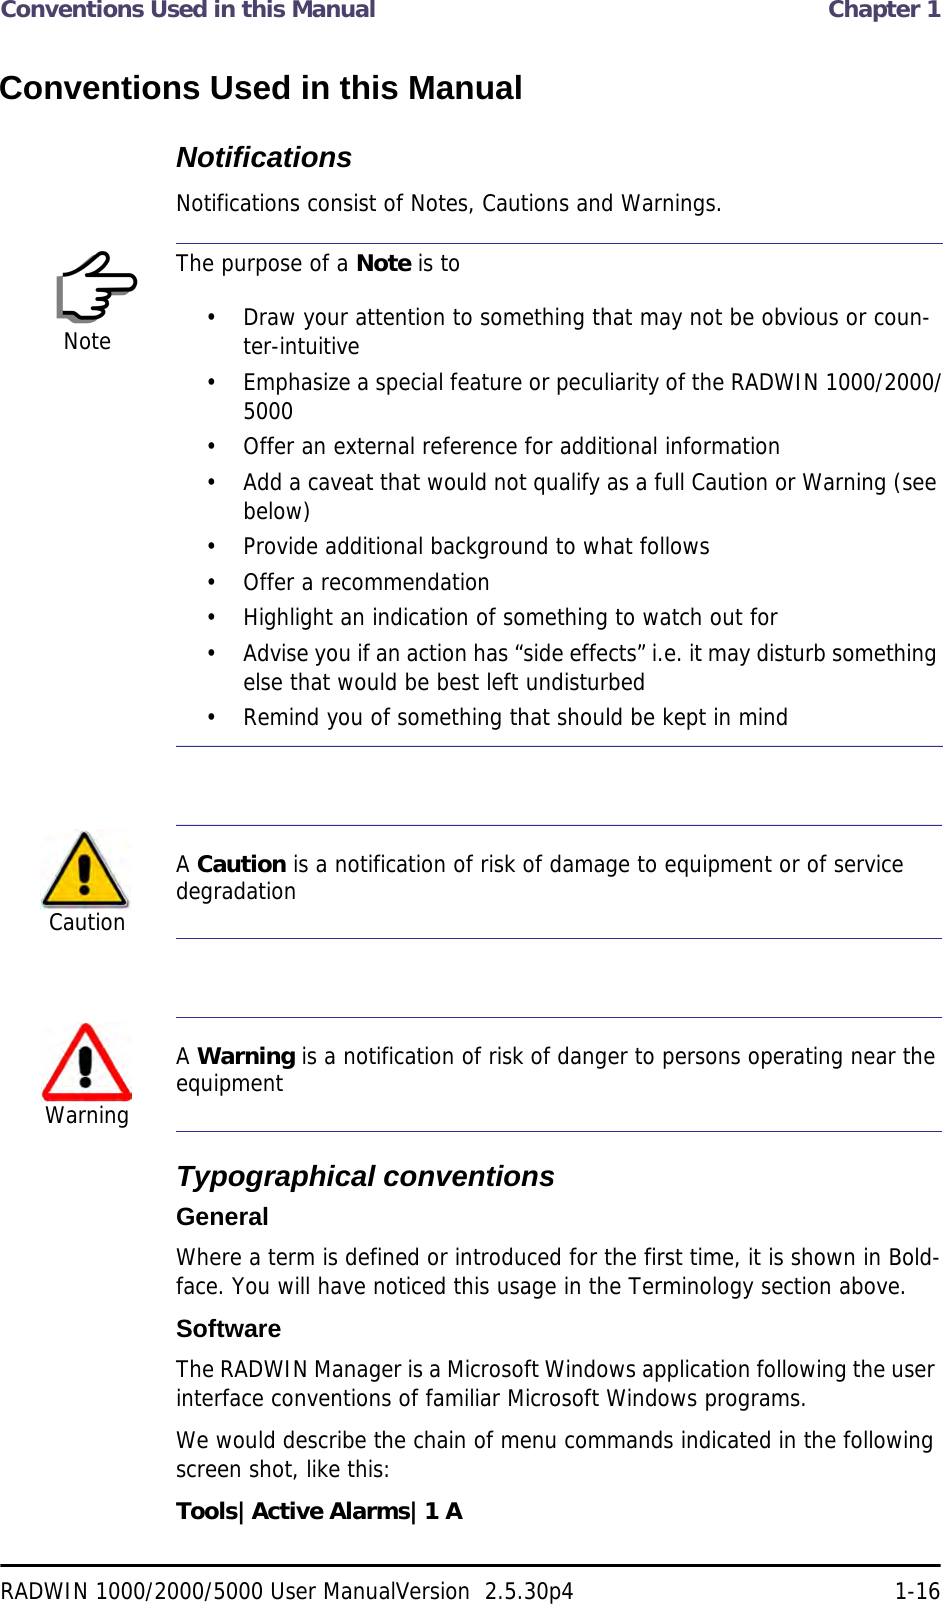 Conventions Used in this Manual  Chapter 1RADWIN 1000/2000/5000 User ManualVersion  2.5.30p4 1-16Conventions Used in this ManualNotificationsNotifications consist of Notes, Cautions and Warnings.Typographical conventionsGeneralWhere a term is defined or introduced for the first time, it is shown in Bold-face. You will have noticed this usage in the Terminology section above.SoftwareThe RADWIN Manager is a Microsoft Windows application following the user interface conventions of familiar Microsoft Windows programs.We would describe the chain of menu commands indicated in the following screen shot, like this:Tools|Active Alarms|1 ANoteThe purpose of a Note is to• Draw your attention to something that may not be obvious or coun-ter-intuitive• Emphasize a special feature or peculiarity of the RADWIN 1000/2000/5000• Offer an external reference for additional information• Add a caveat that would not qualify as a full Caution or Warning (see below)• Provide additional background to what follows• Offer a recommendation• Highlight an indication of something to watch out for• Advise you if an action has “side effects” i.e. it may disturb something else that would be best left undisturbed• Remind you of something that should be kept in mindCautionA Caution is a notification of risk of damage to equipment or of service degradationWarningA Warning is a notification of risk of danger to persons operating near the equipment